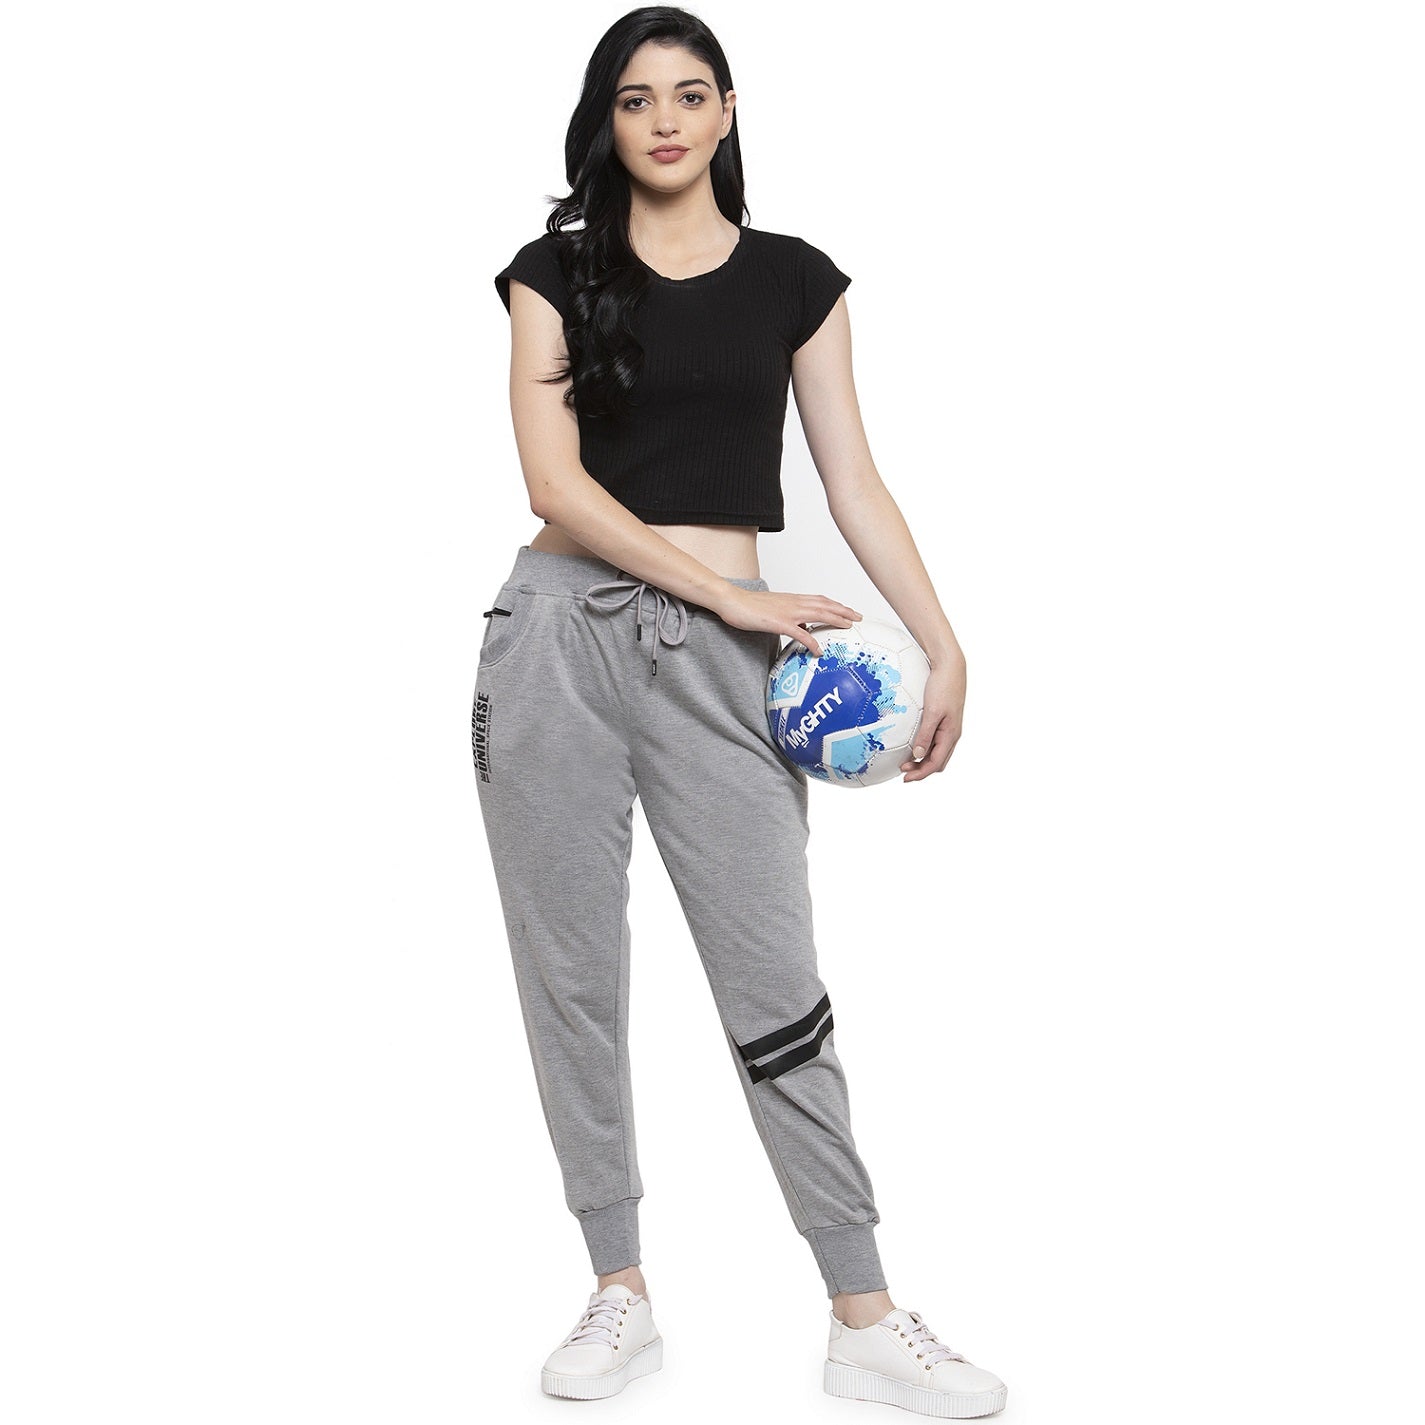 Women's Cotton Slim Fit Joggers Track Pants with 2 Zippered Pockets